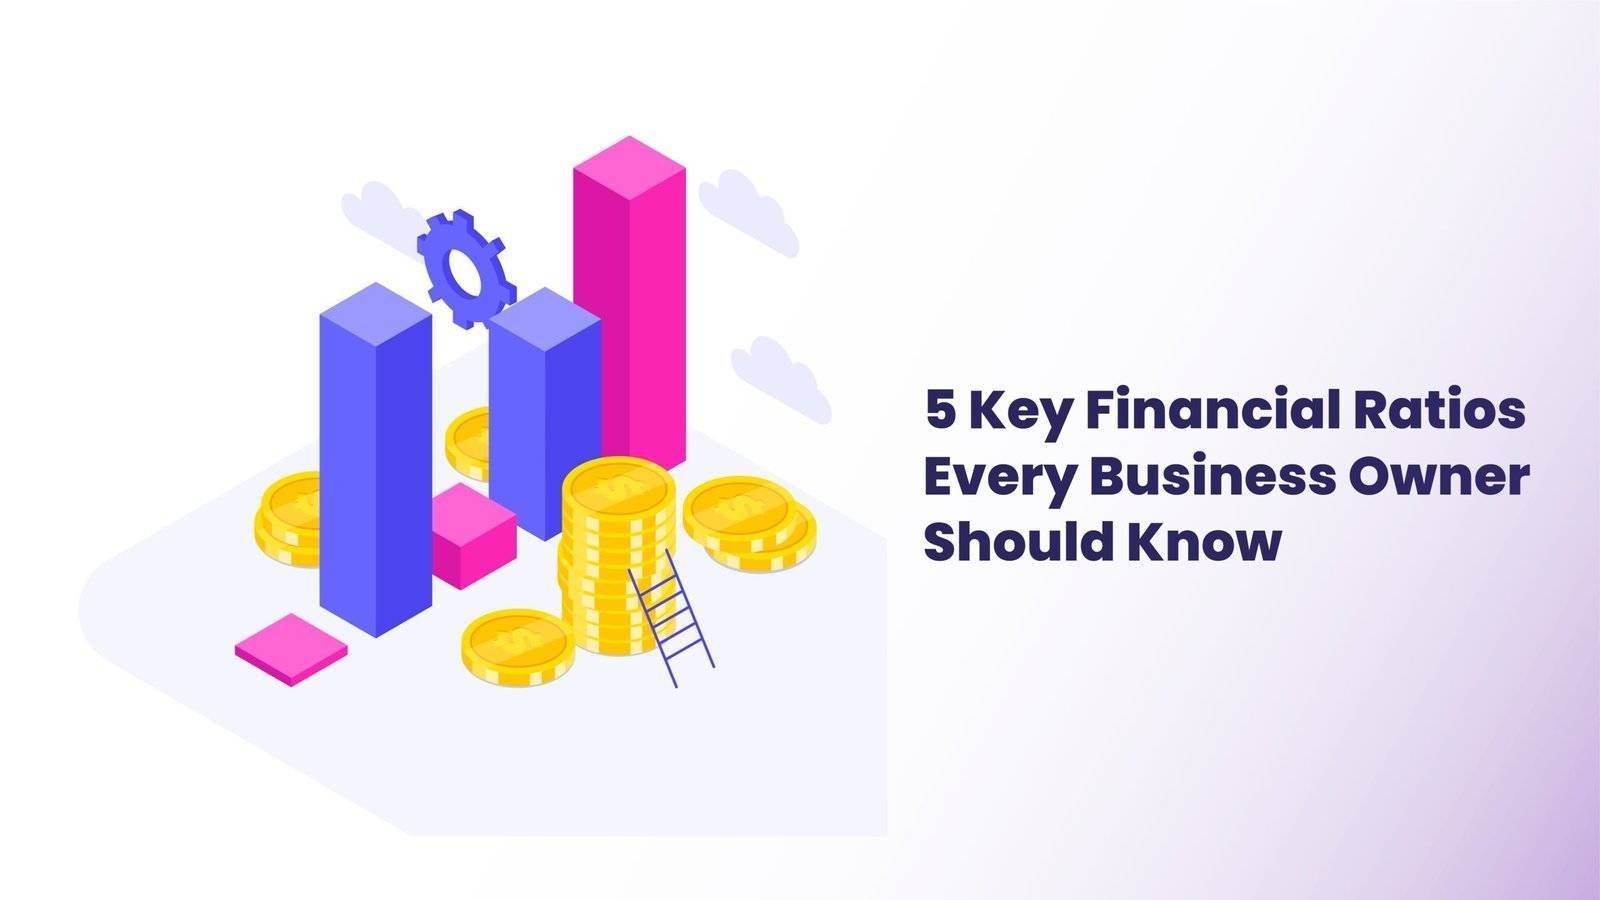 5 Key Financial Ratios Every Business Owner Should Know